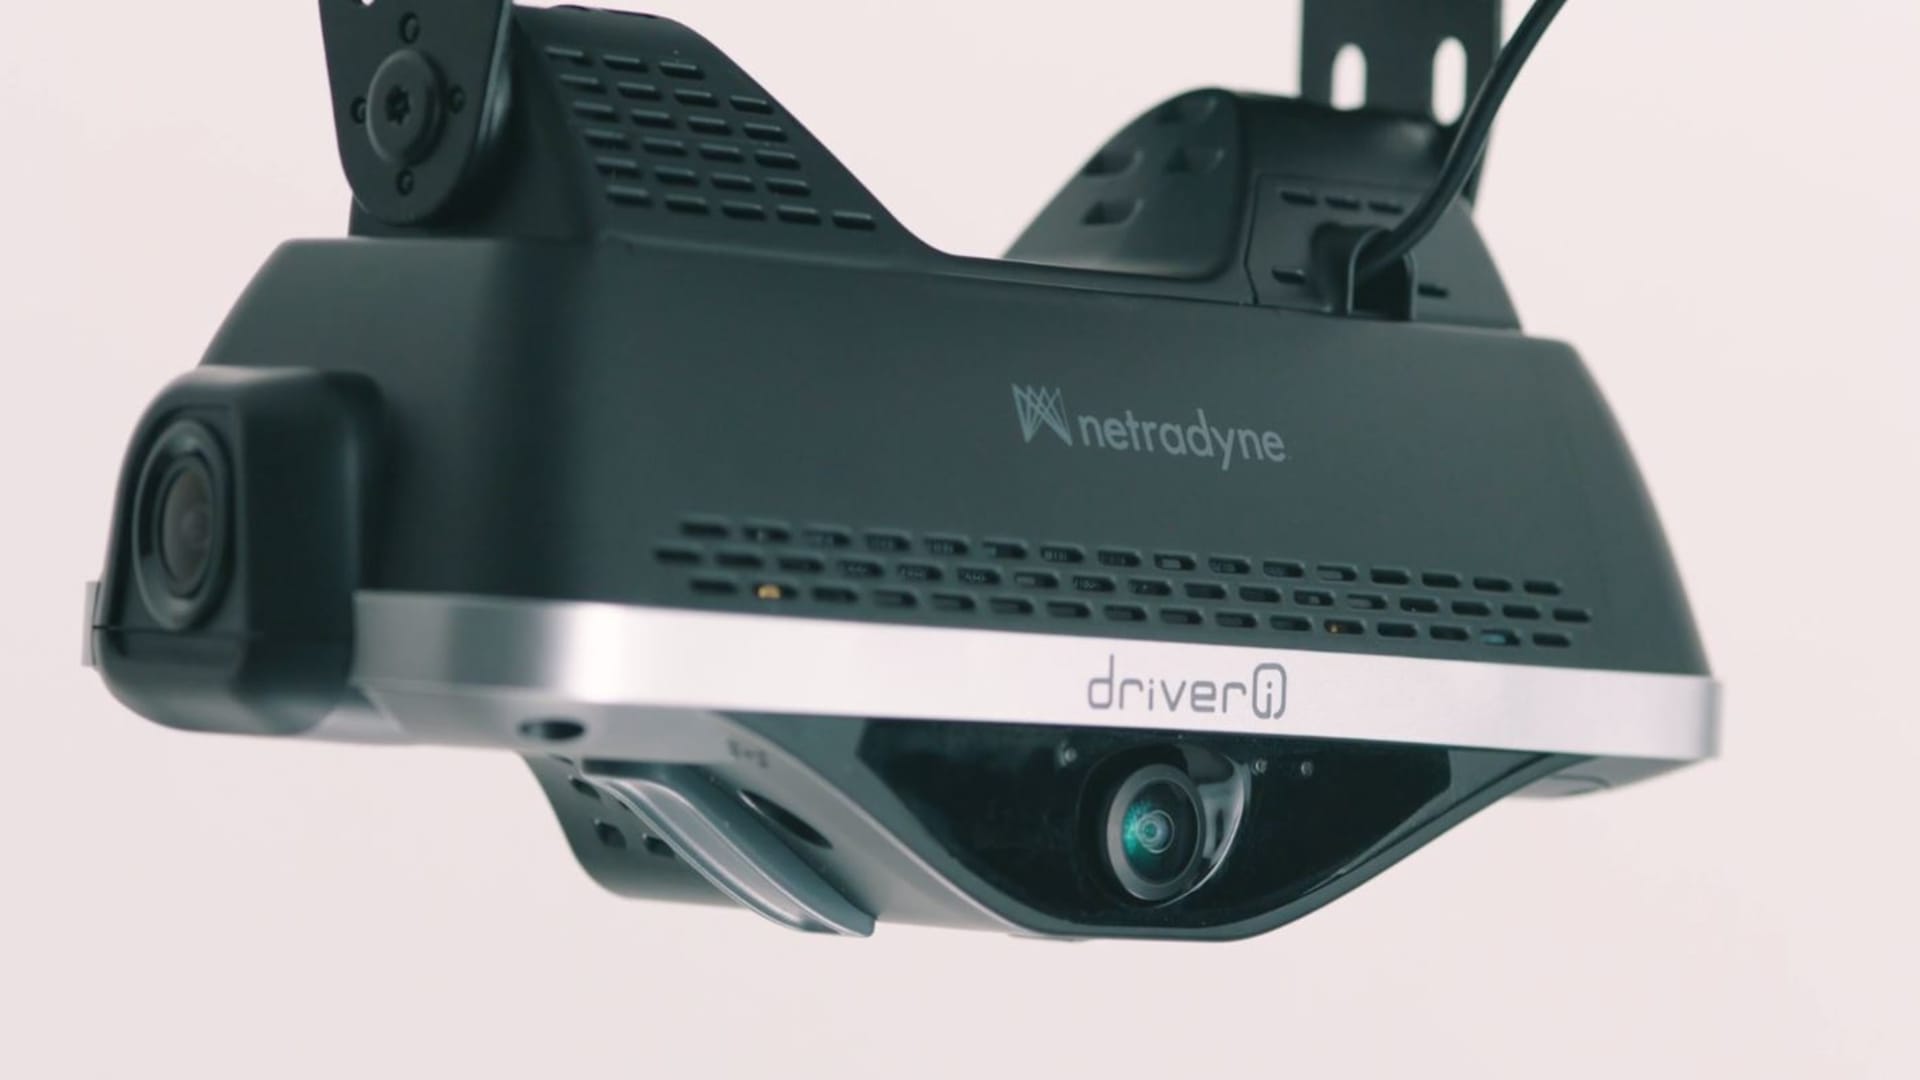 Amazon is using an AI-powered camera made by Netradyne, a San Diego-based start-up that was founded in 2015 by two former senior Qualcomm employees.